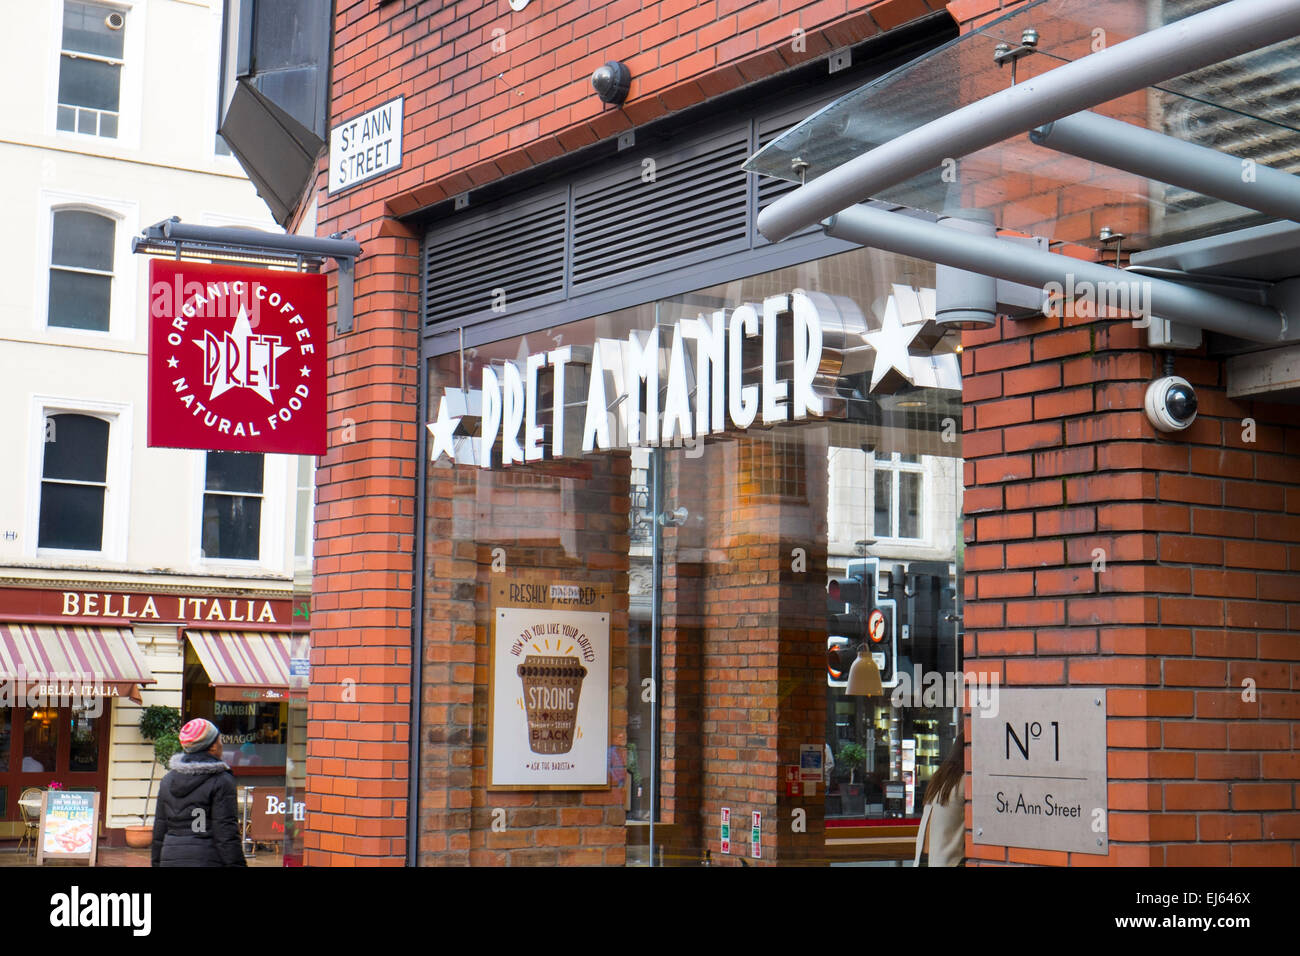 Pret a manger sandwich store and bella italia restaurant in Manchester England Stock Photo